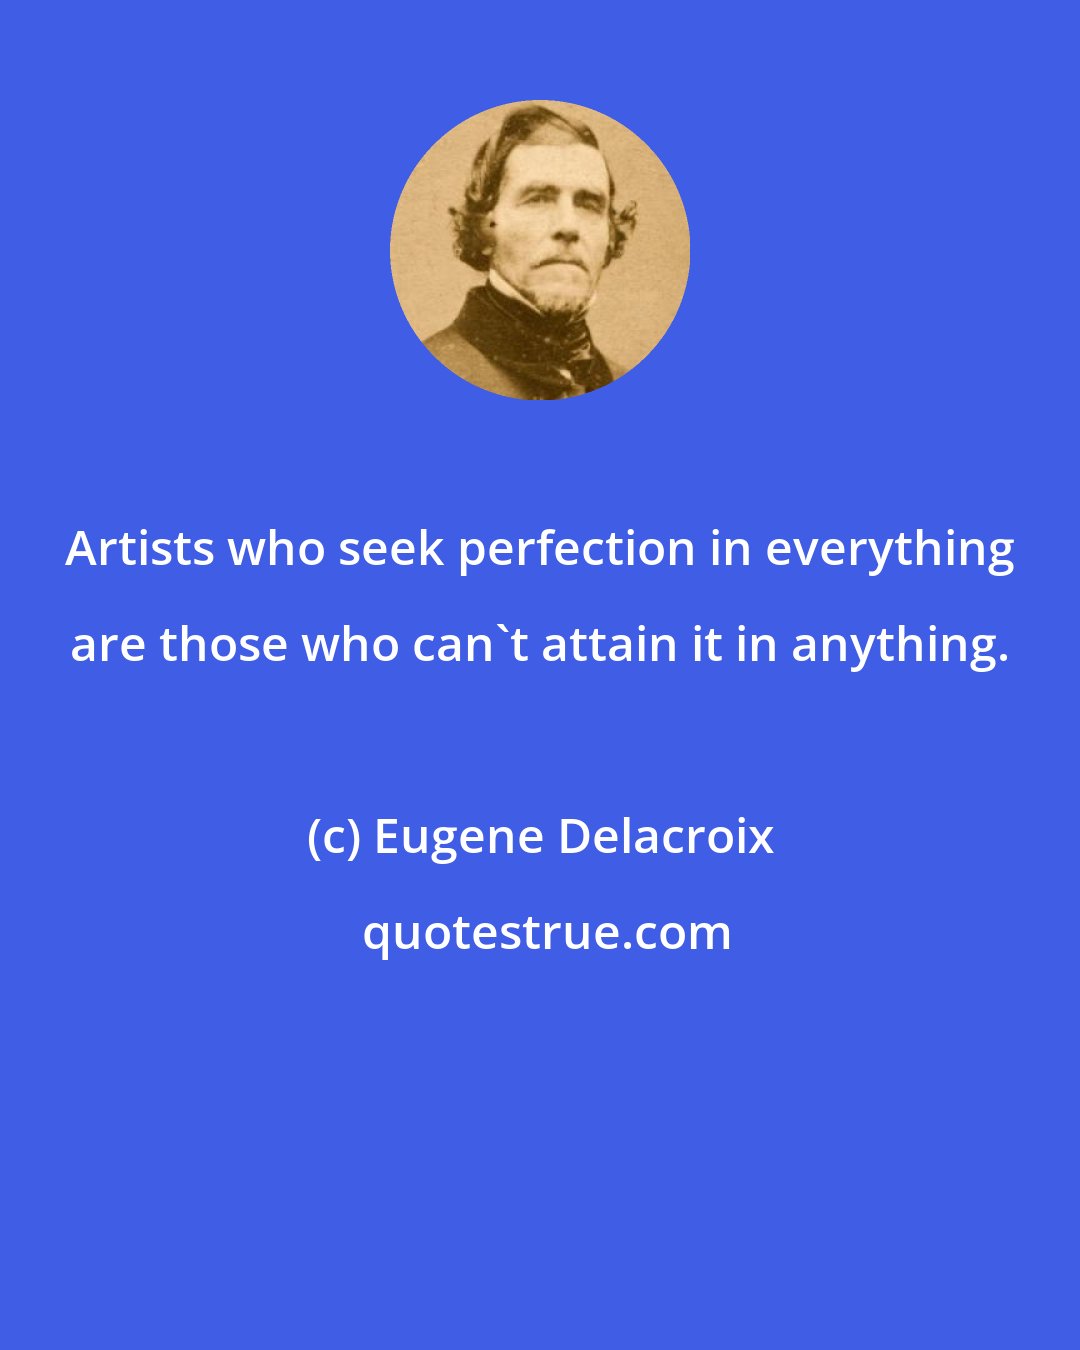 Eugene Delacroix: Artists who seek perfection in everything are those who can't attain it in anything.